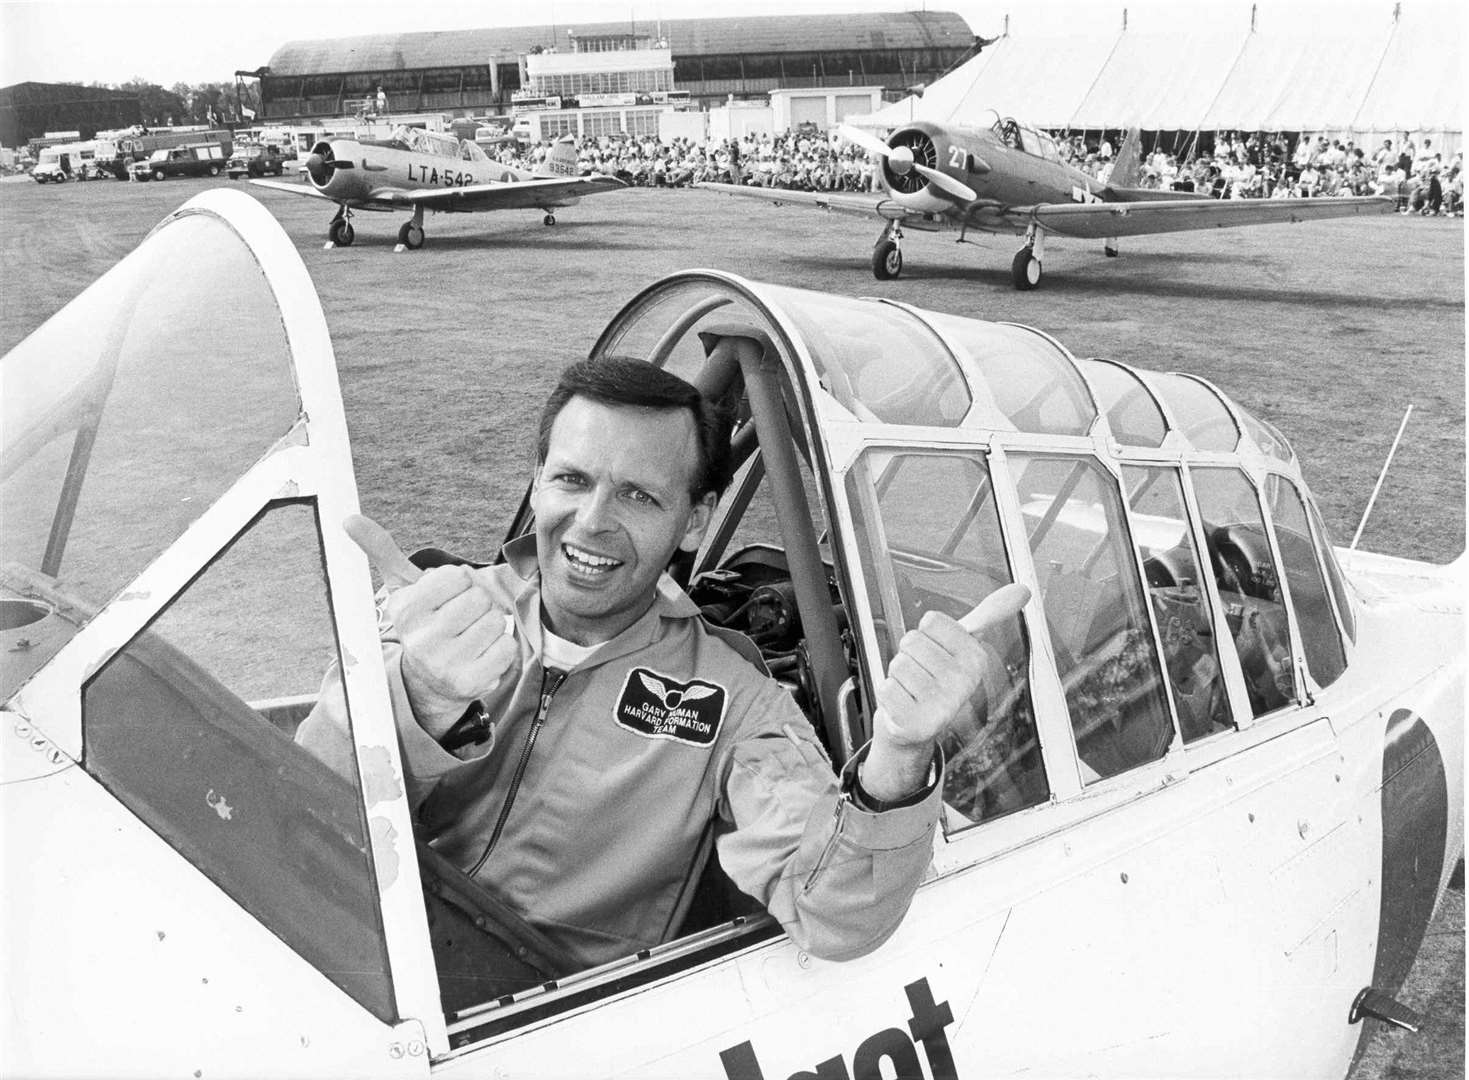 Great Warbirds Airdisplay, West Malling Airfield, Kent. Pop star Gary Newman gets set for take off. August, 1990